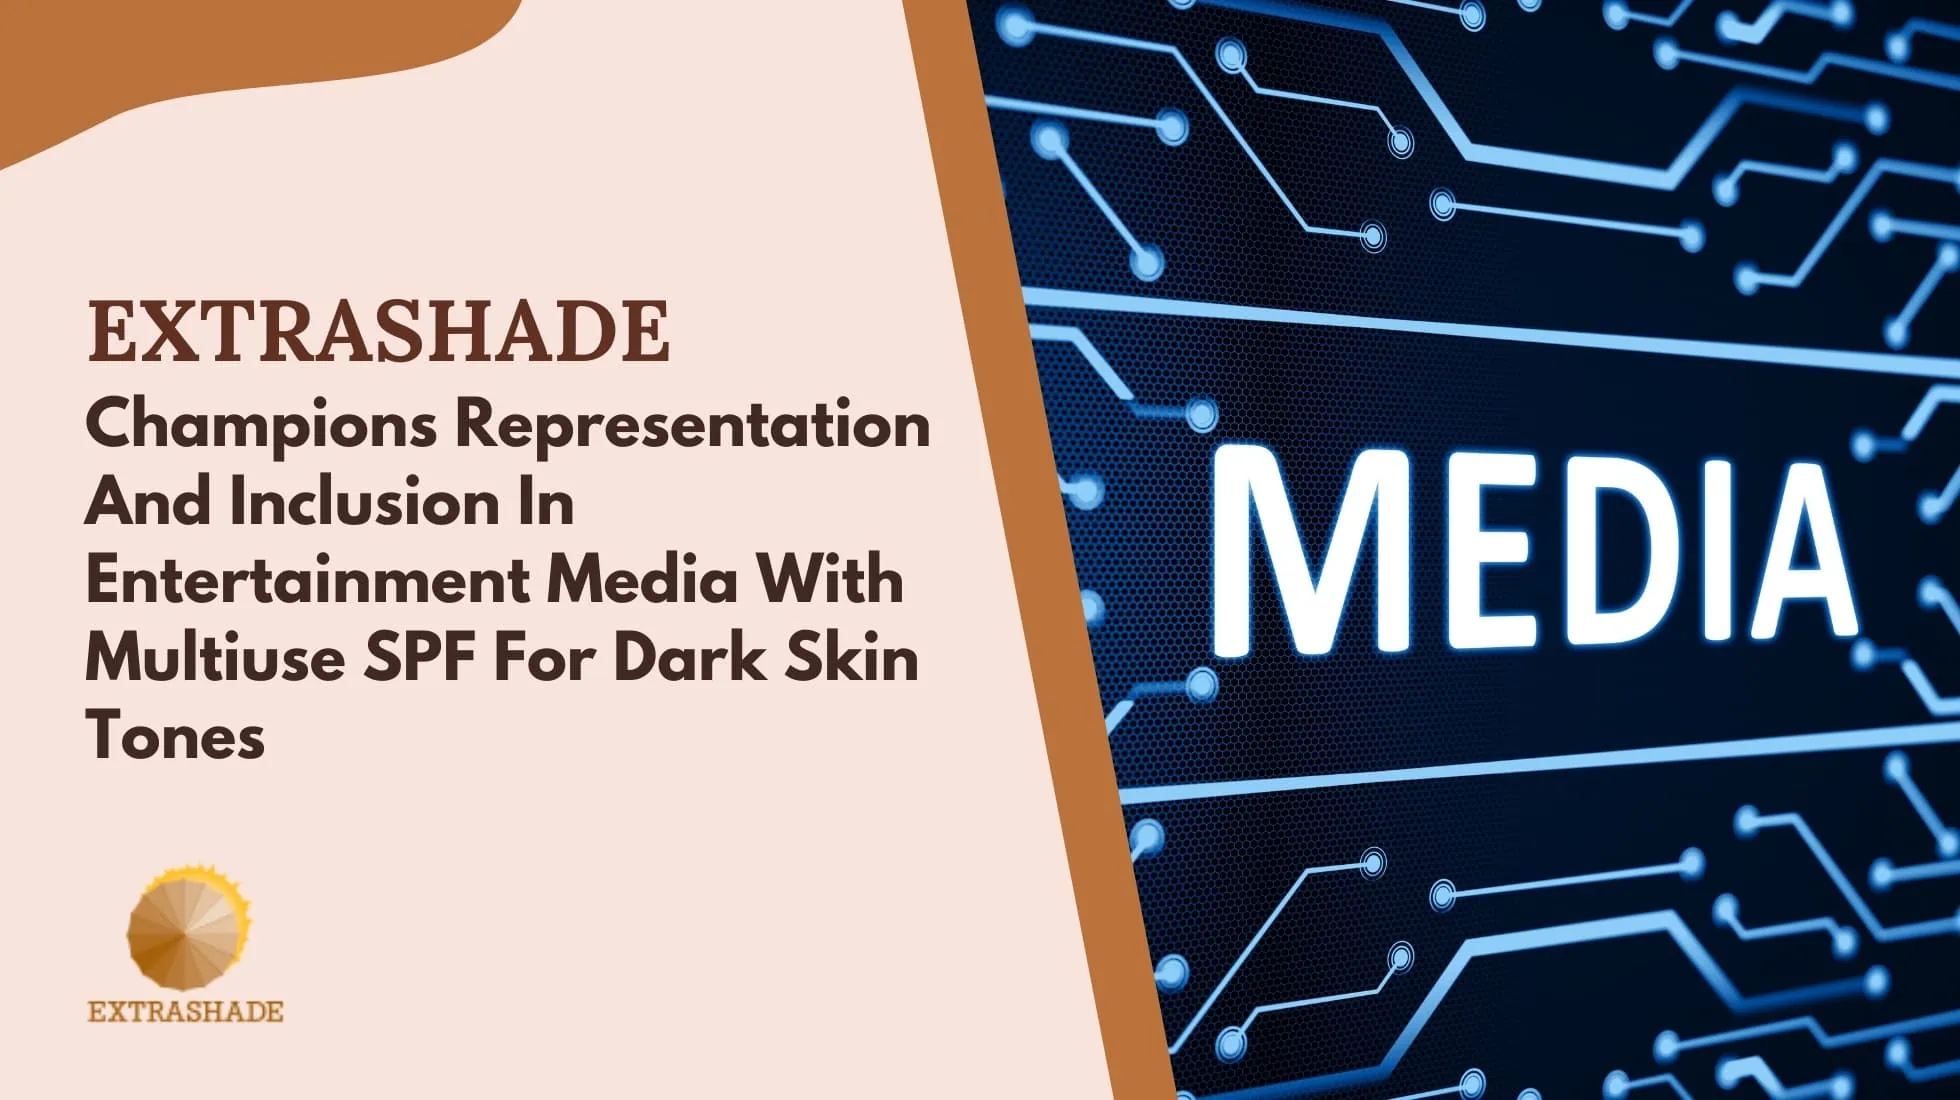 EXTRASHADE Champions Representation and Inclusion in Entertainment Media with Multiuse SPF for Dark Skin Tones